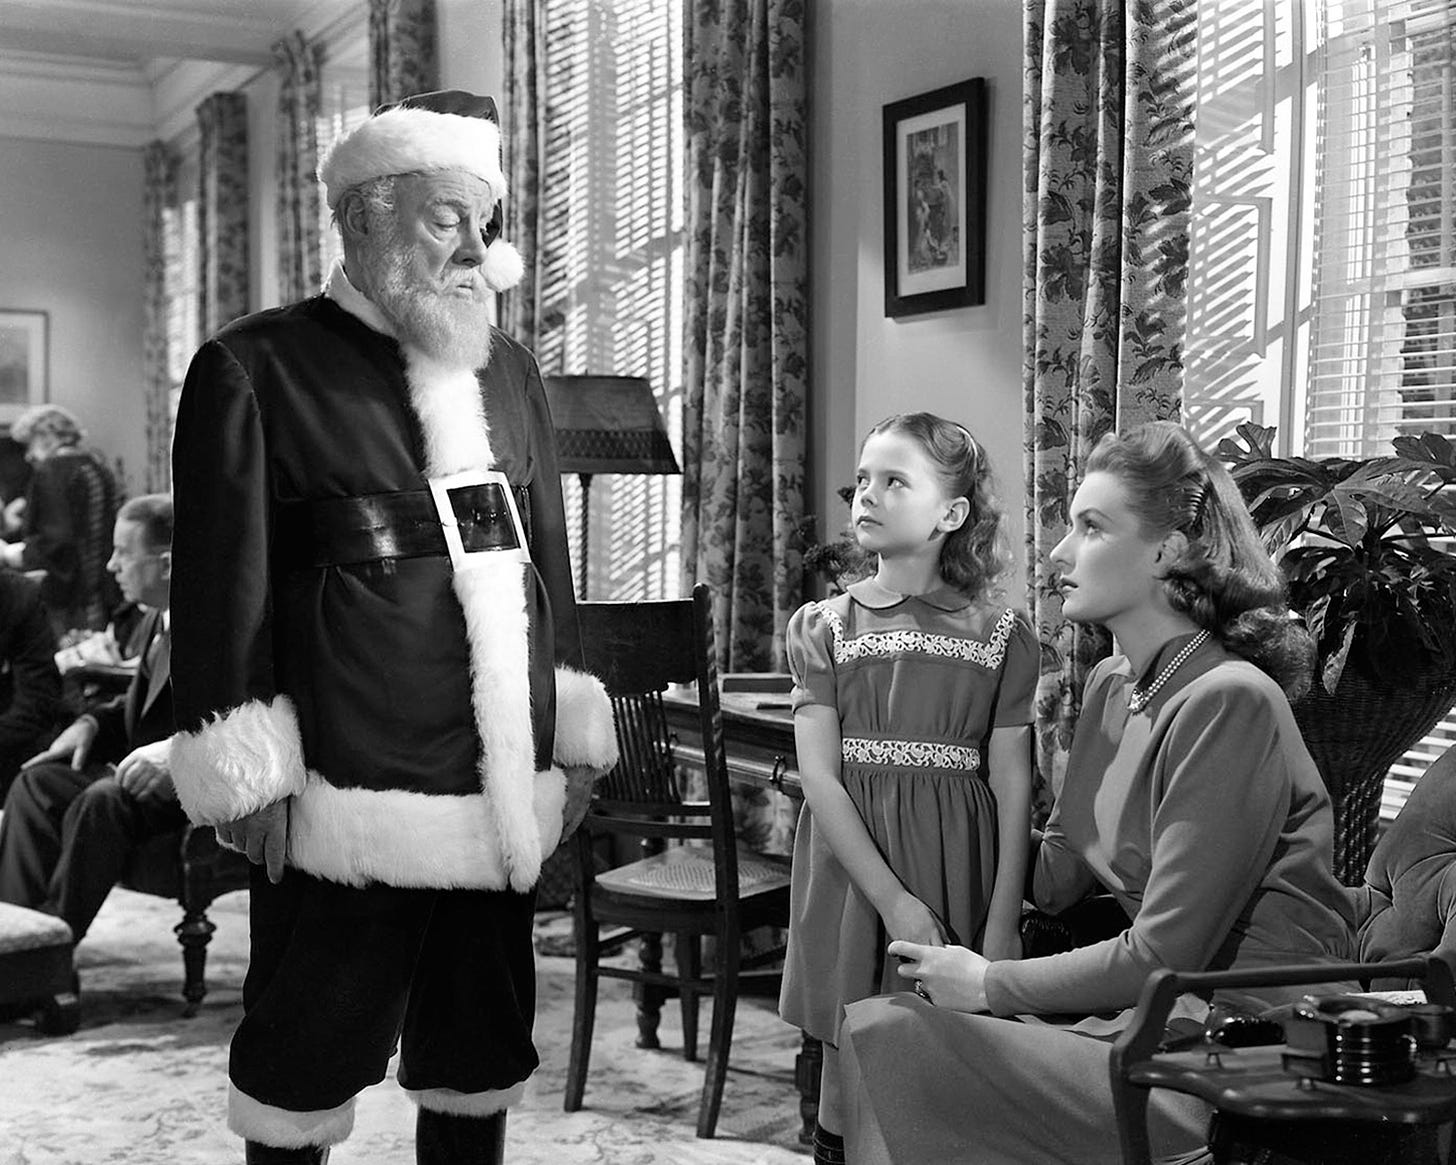 Santa meets up with little Susie and her mom Doris on Christmas Day